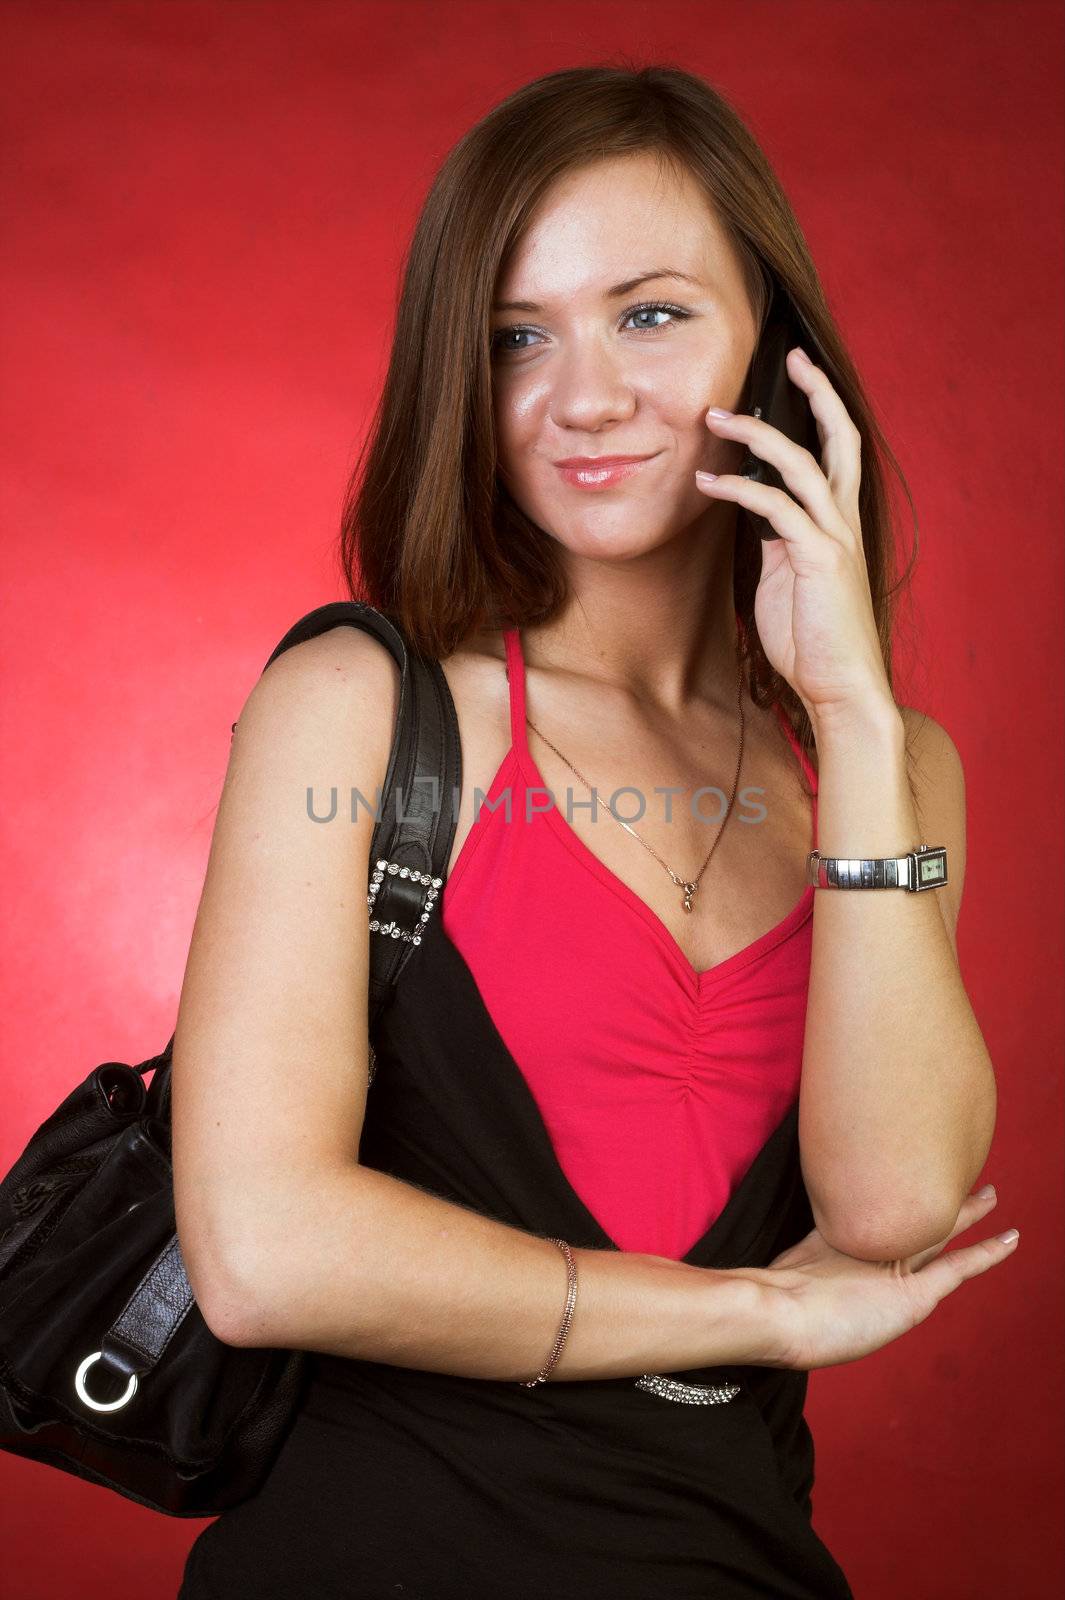 Woman on Phone by Cheschhh